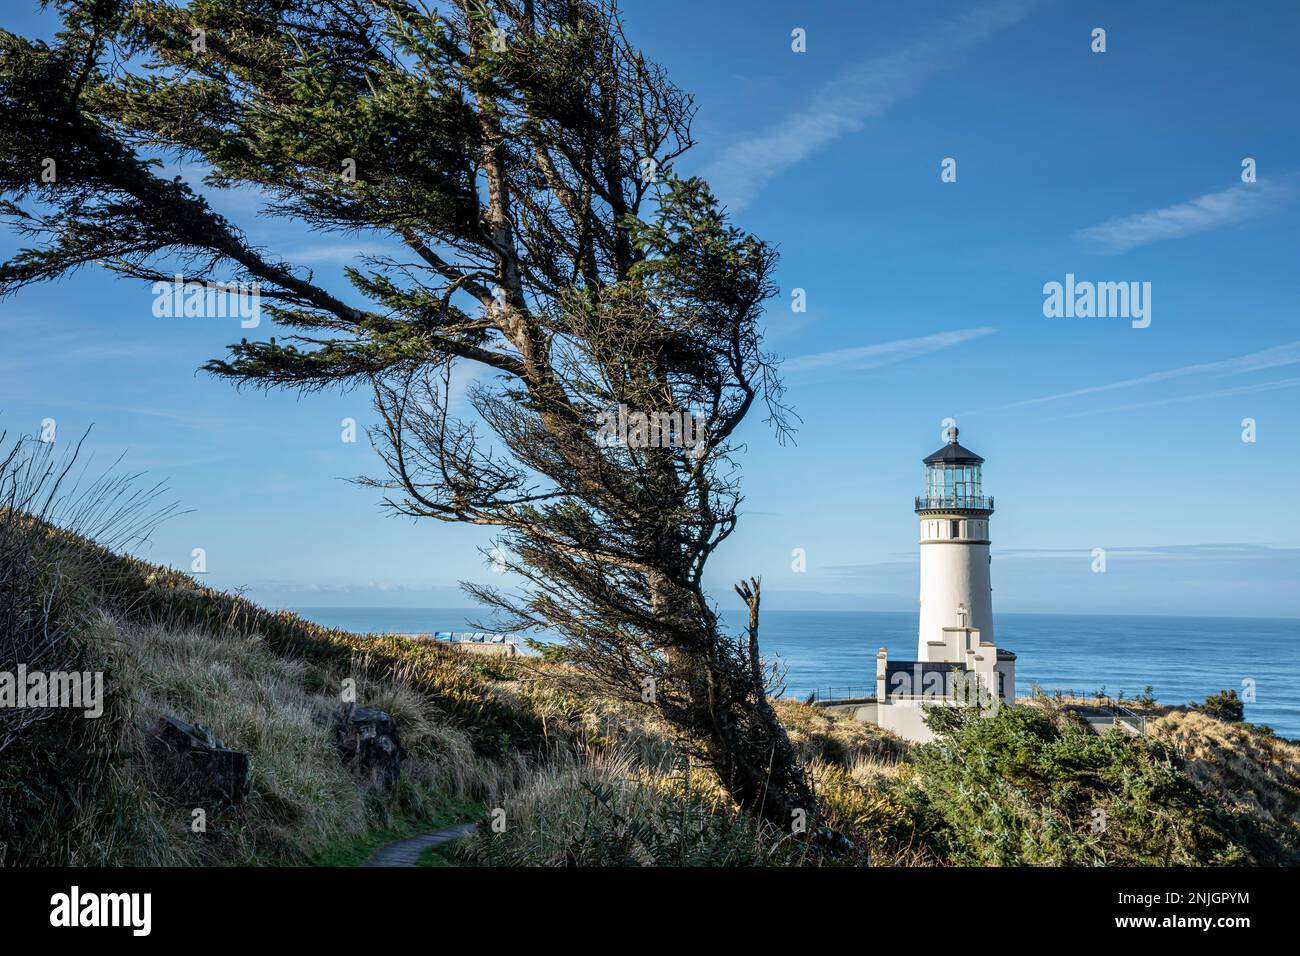 WA23020-00...WASHINGTON - Wind scultputered tree and the North Point Lighthouse overlooking the Pacific Ocean in Cape Disappointment State Park. Stock Photo